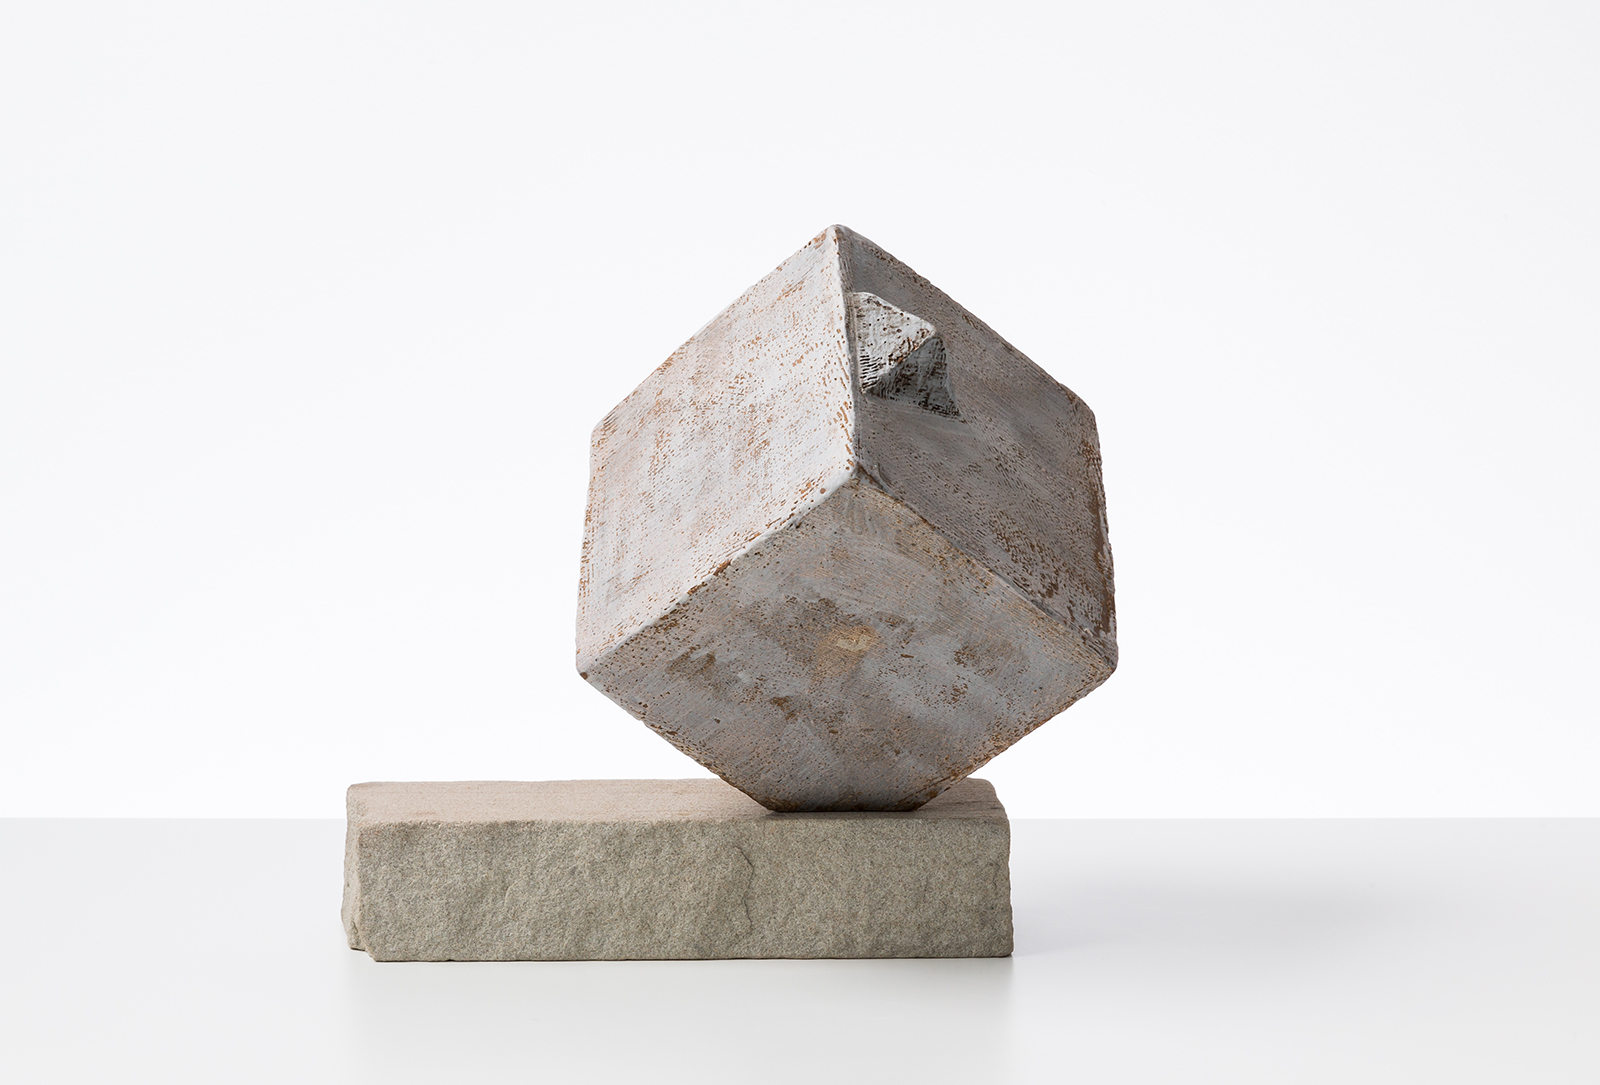 UNTITLED (TR615), 2014 stoneware and slip with stone base, 8 3/4 x 9 1/4 x 8 in, private collection